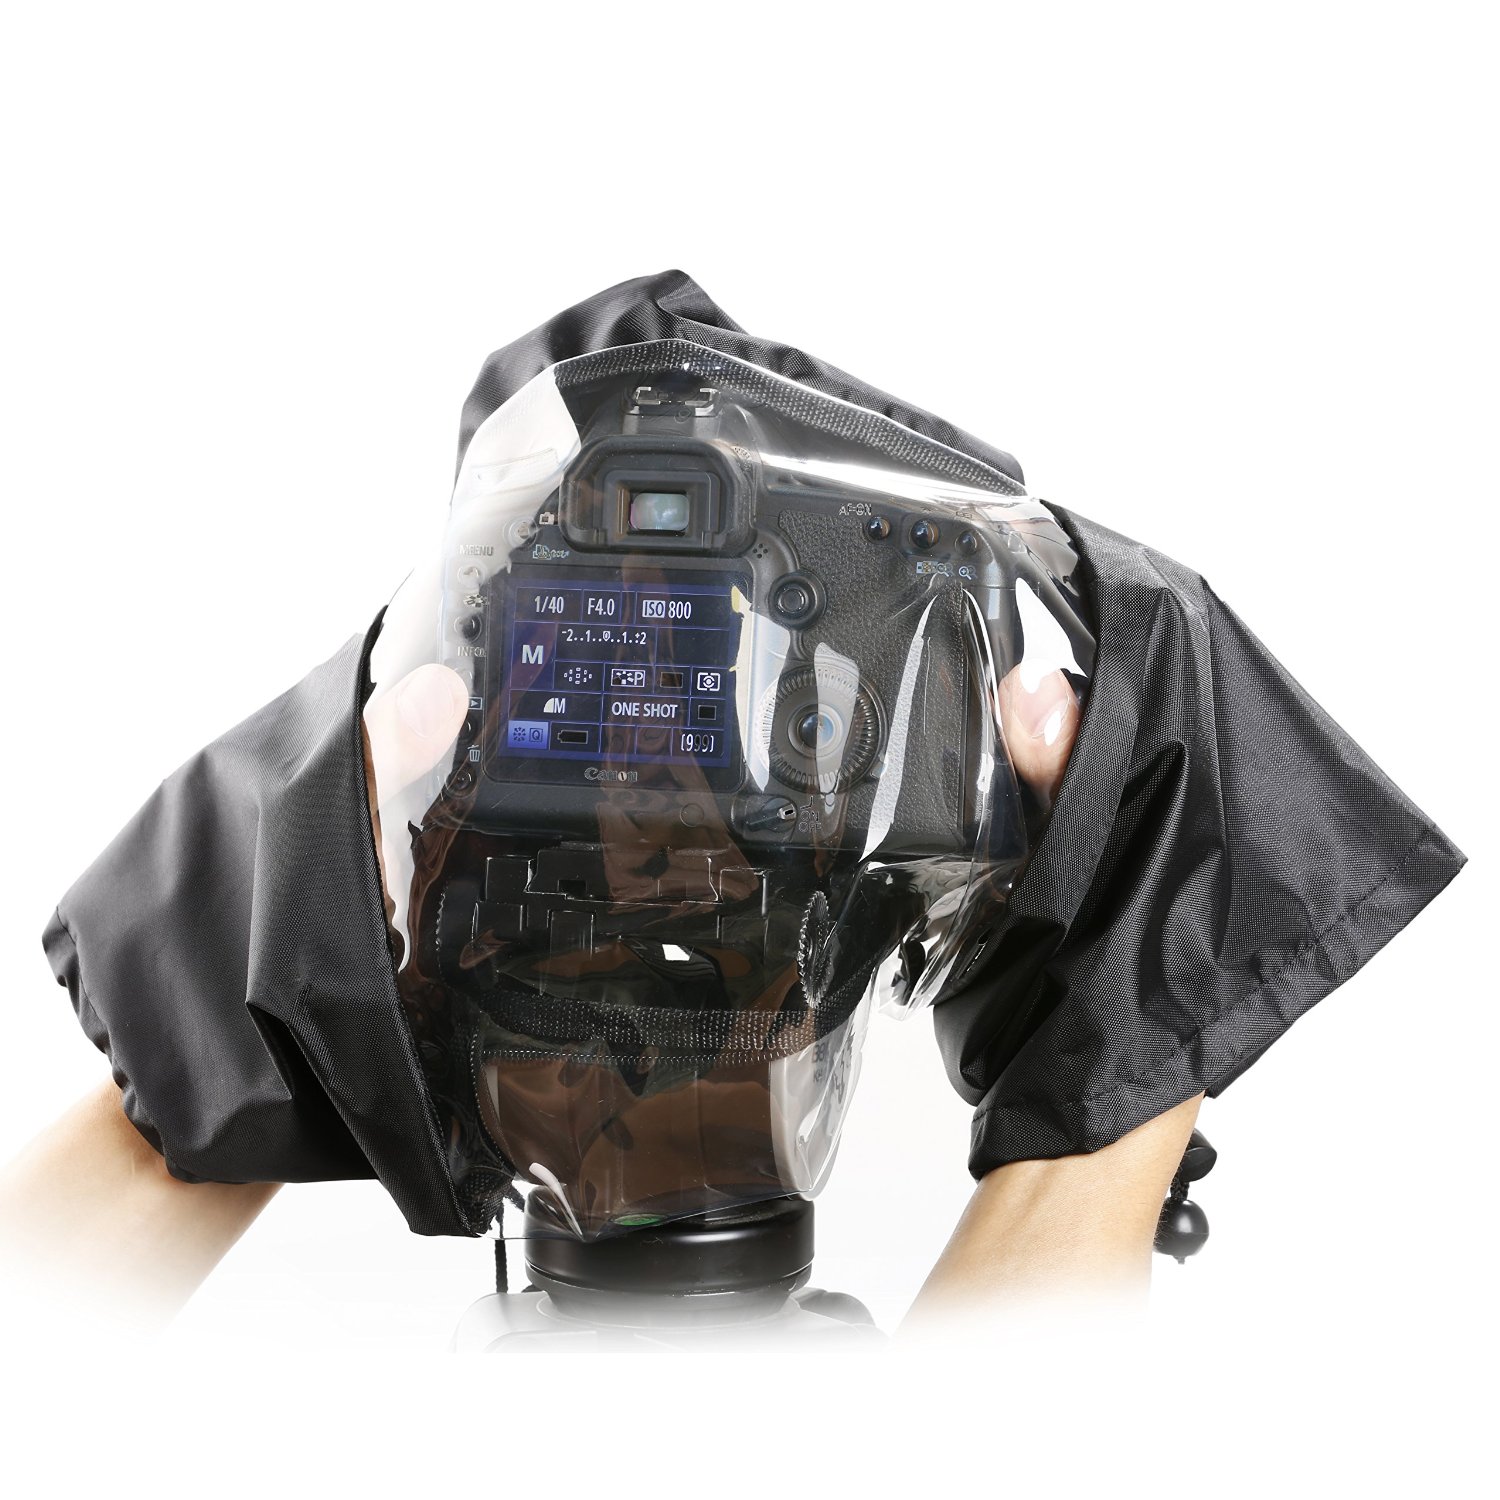 Movo Crc01 Waterproof Dslr Camera Rain Cover Dust Protector For